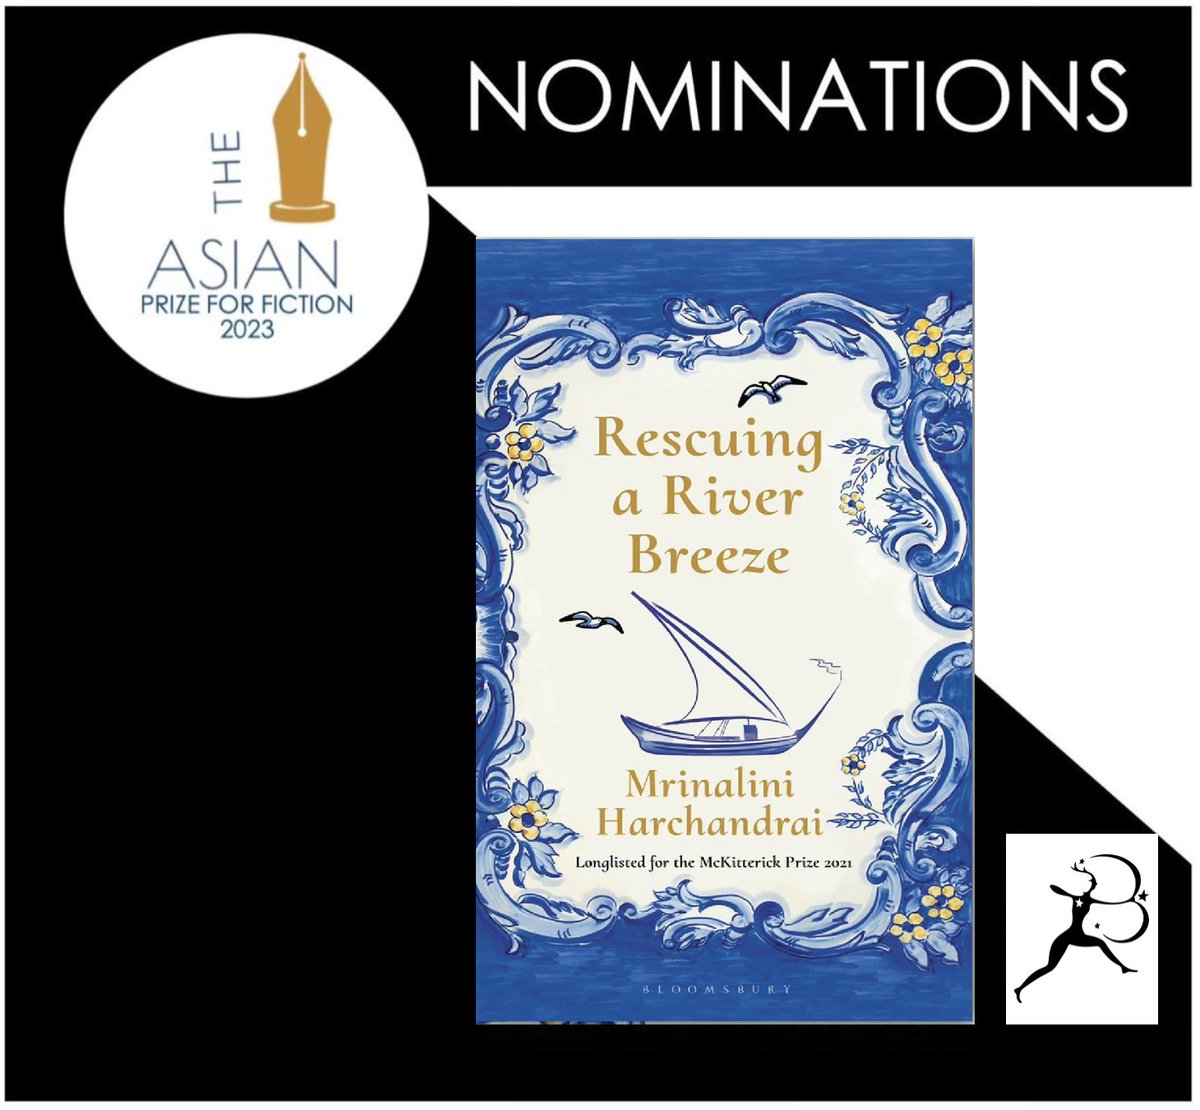 Mrinalini Harchandrani's Rescuing a River Breeze is an outstanding work of fiction that explores in depth the anatomy of intergenerationally and mirrors loss and renewal.
#theasianprizes, #nominations, @BloomsburyIndia #fiction, #bookawards2023, #theasiangroup